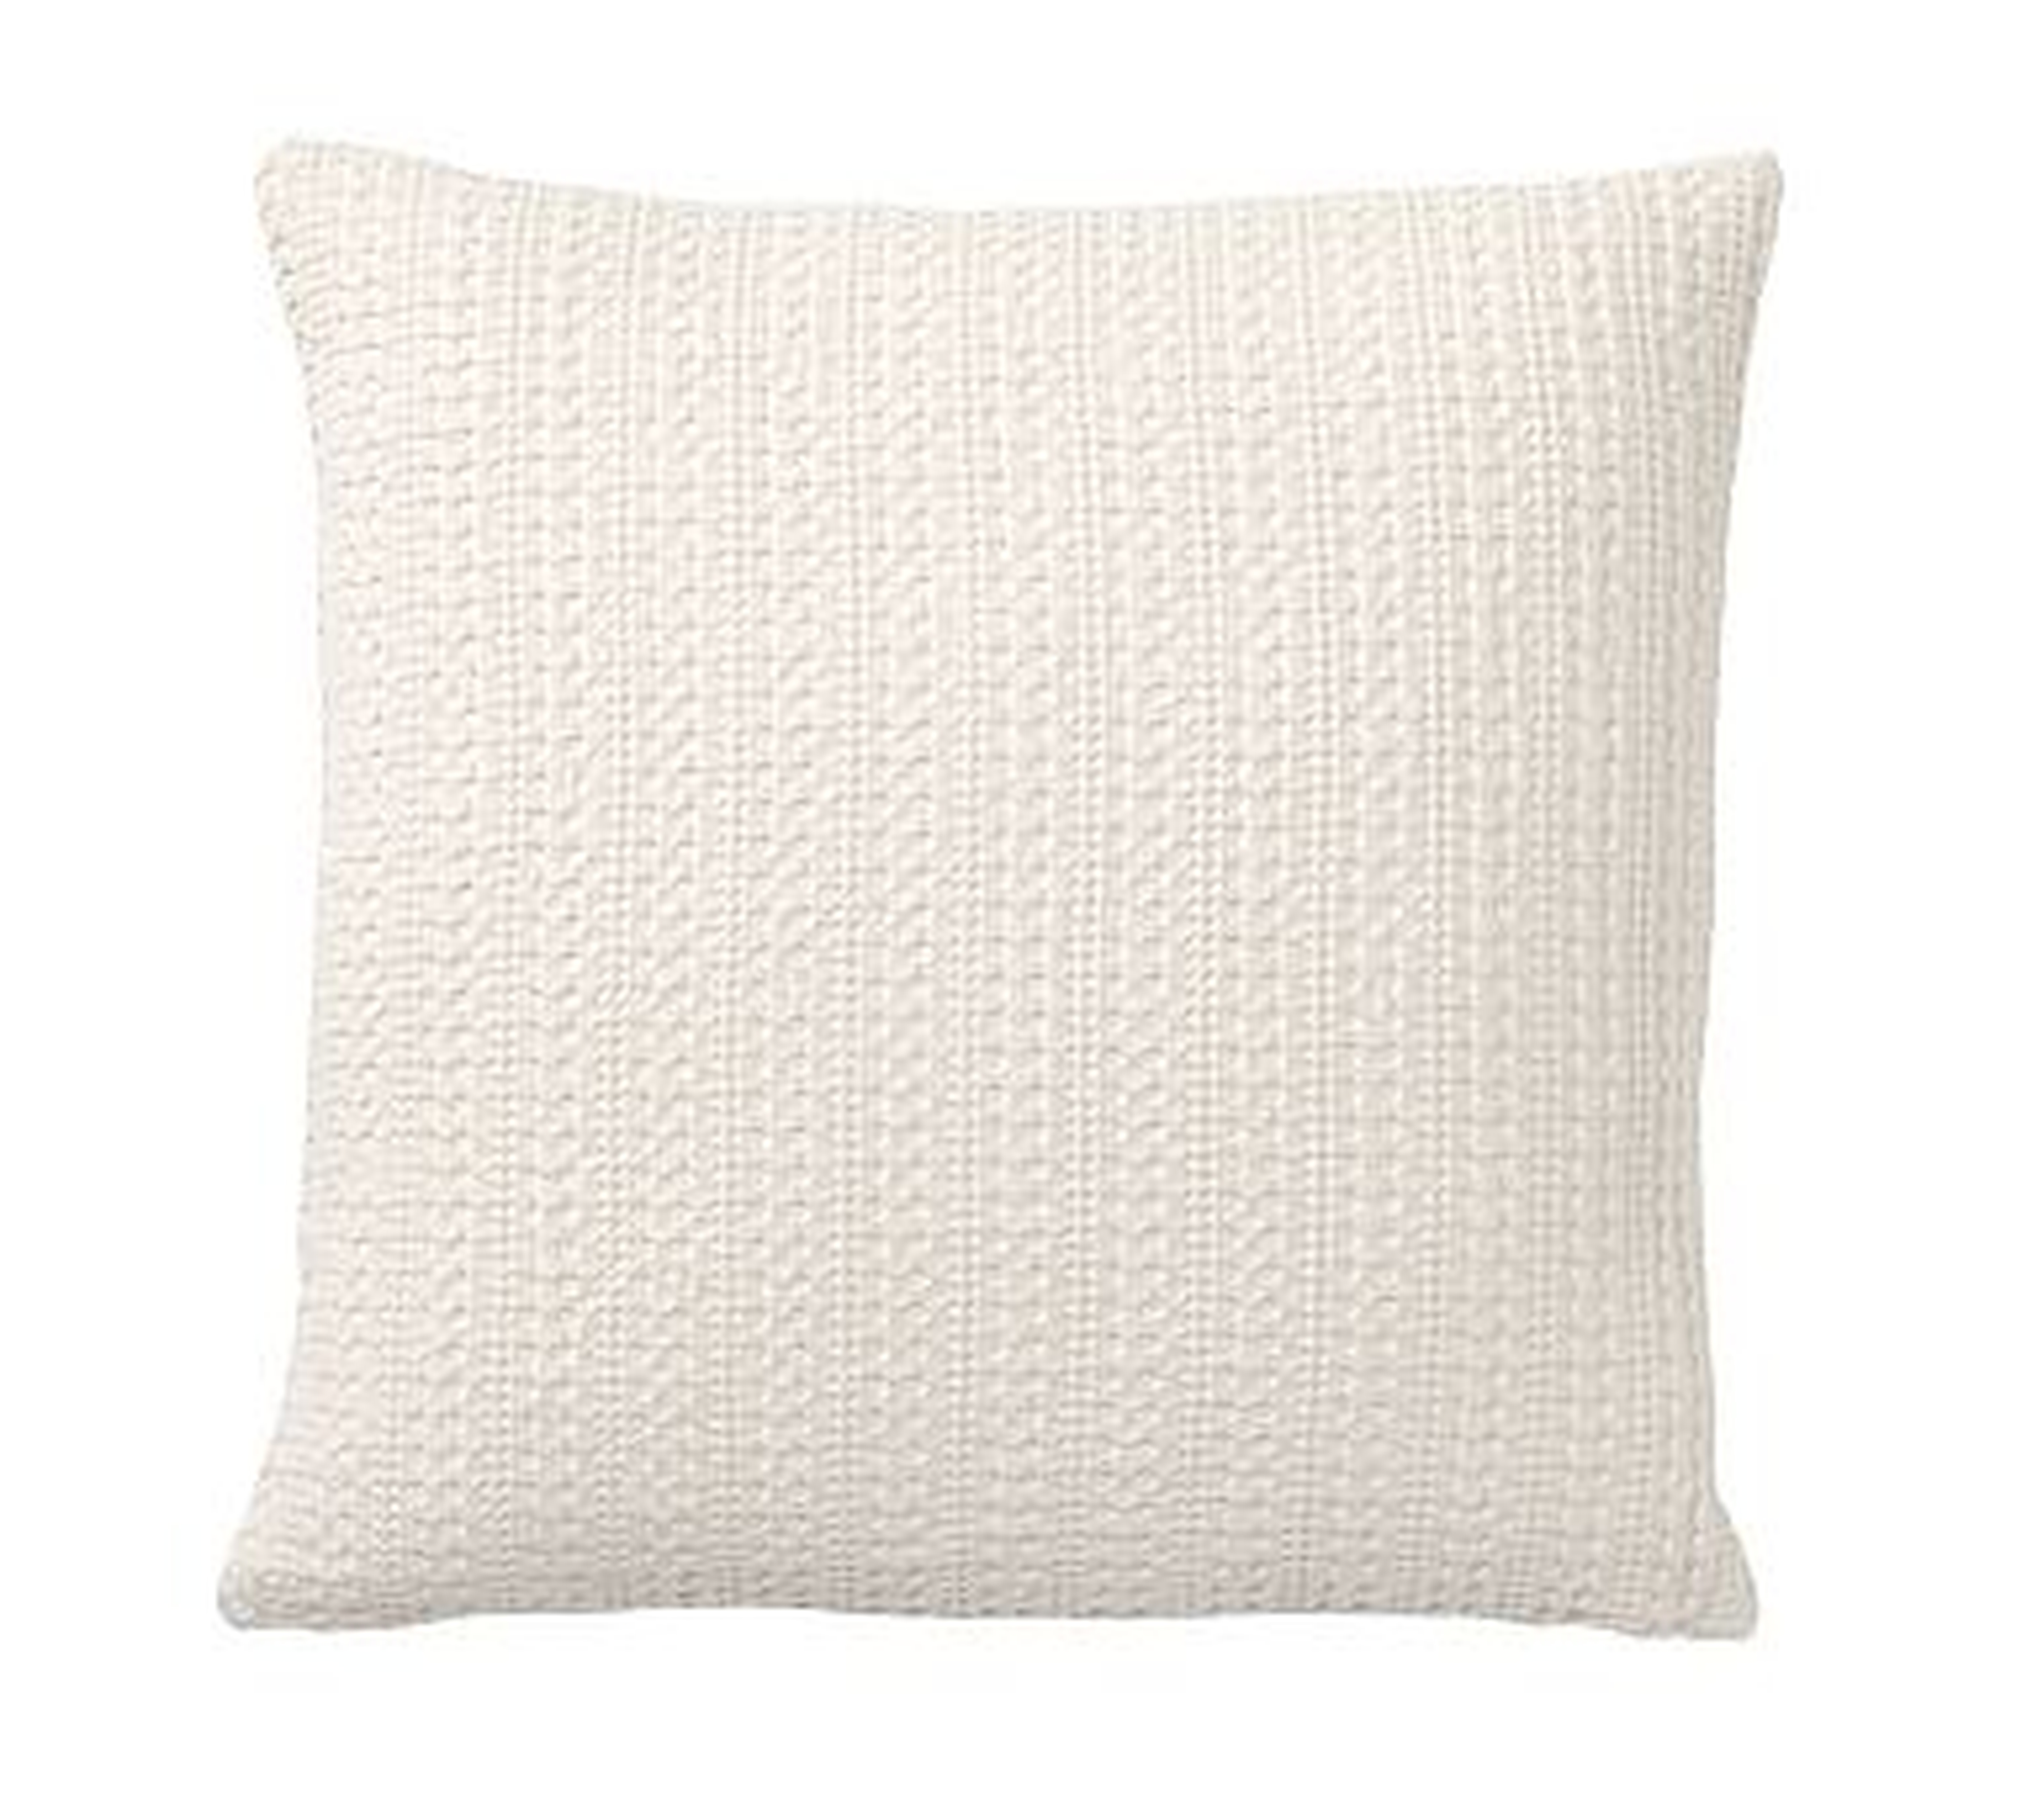 Honeycomb Pillow Cover, 18", Ivory - Pottery Barn